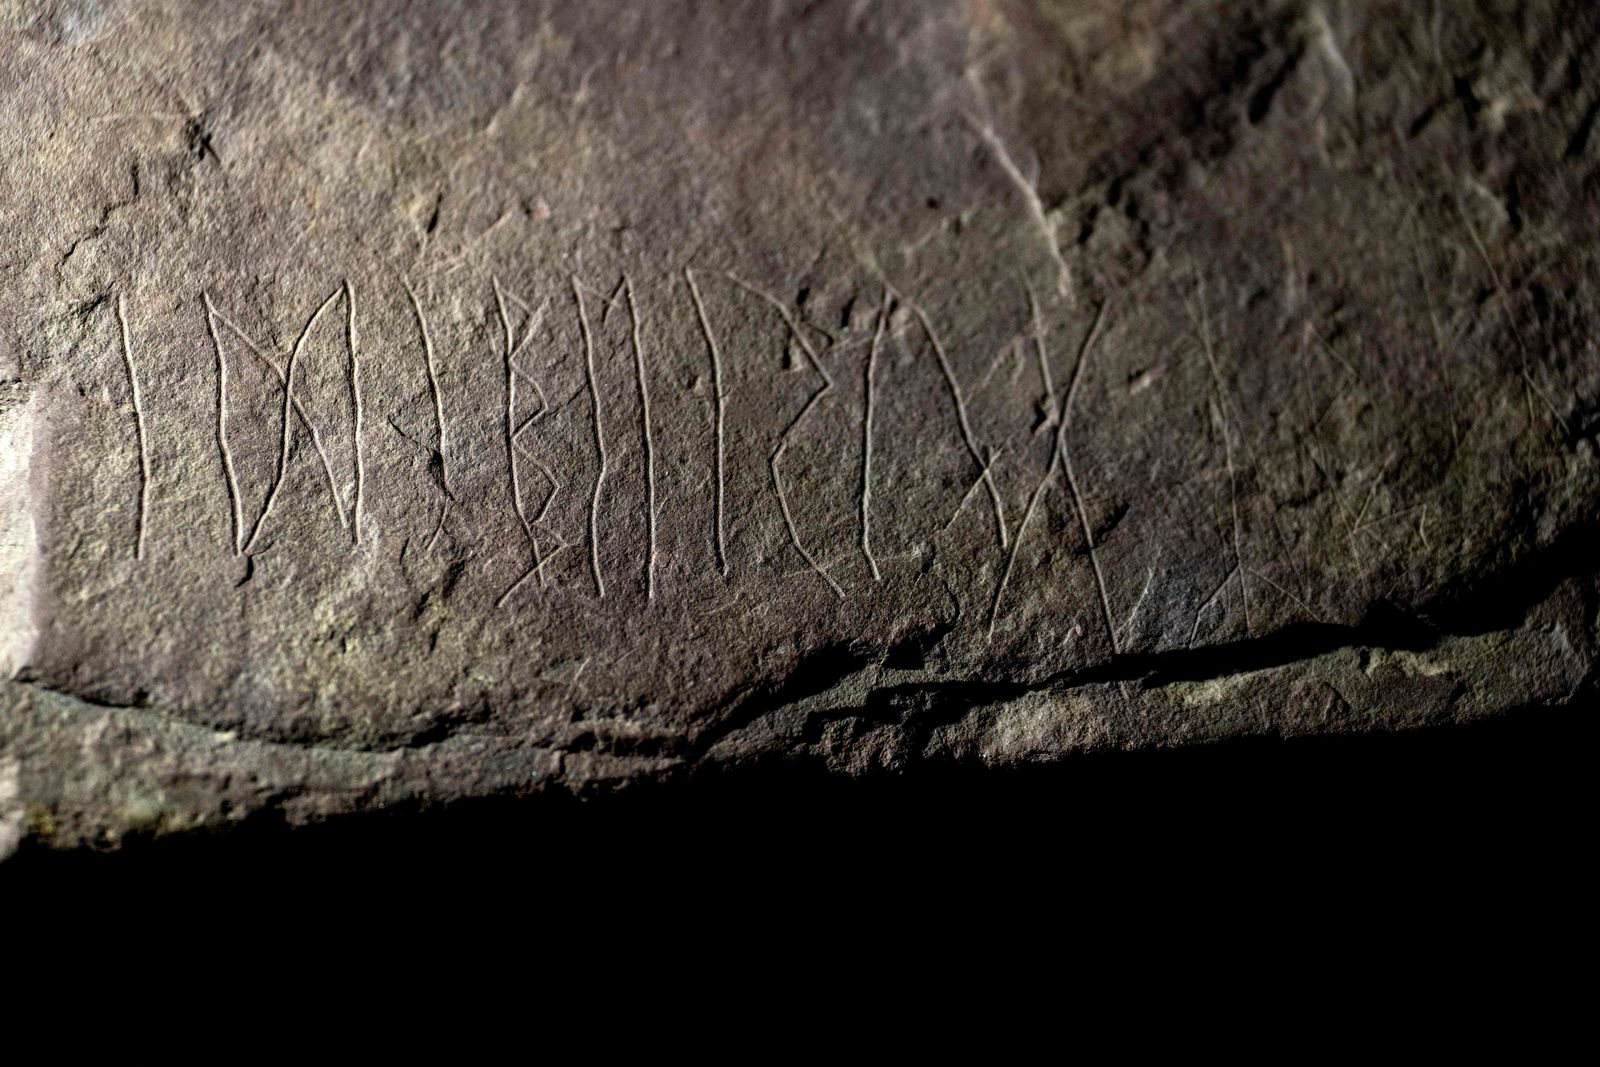 Sensational' Runestone Discovered in Norway May Be the World's Oldest |  Smart News| Smithsonian Magazine